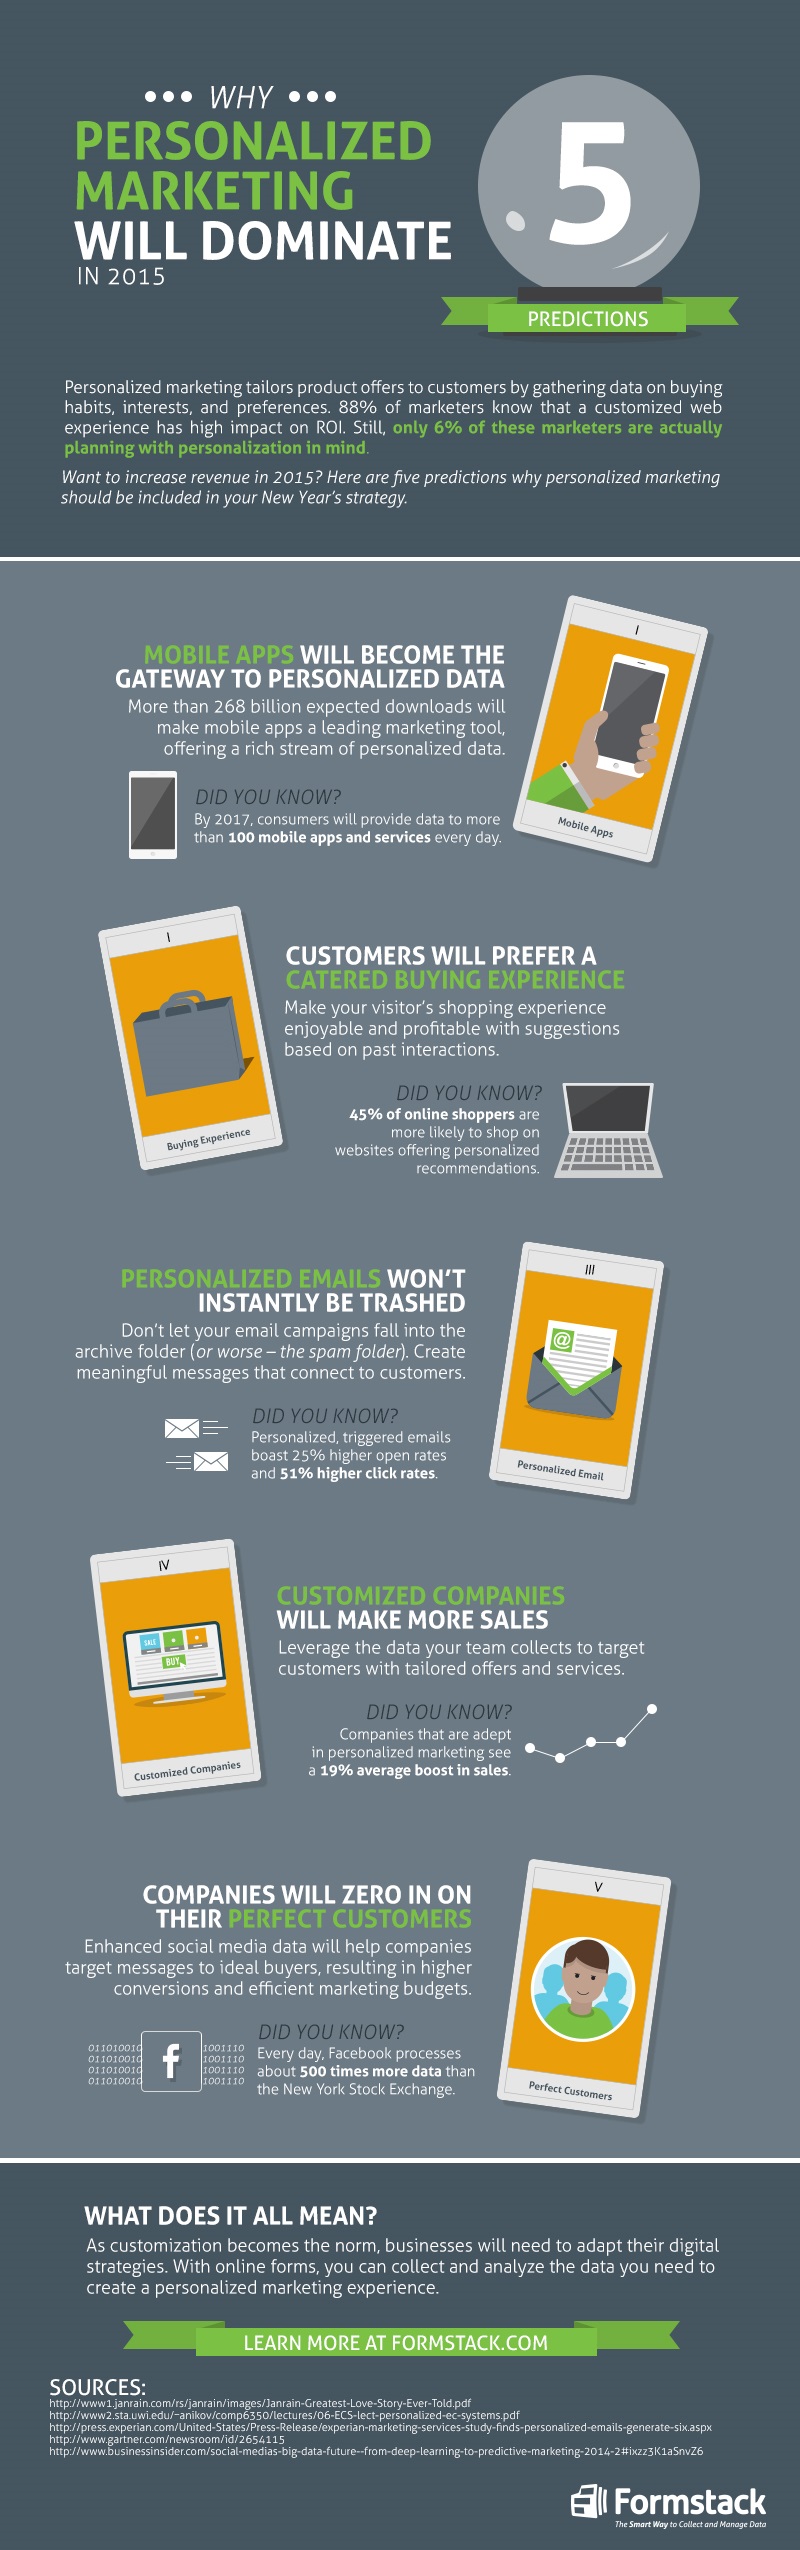 why-personalized-marketing-will-dominate-in-2015-infographic